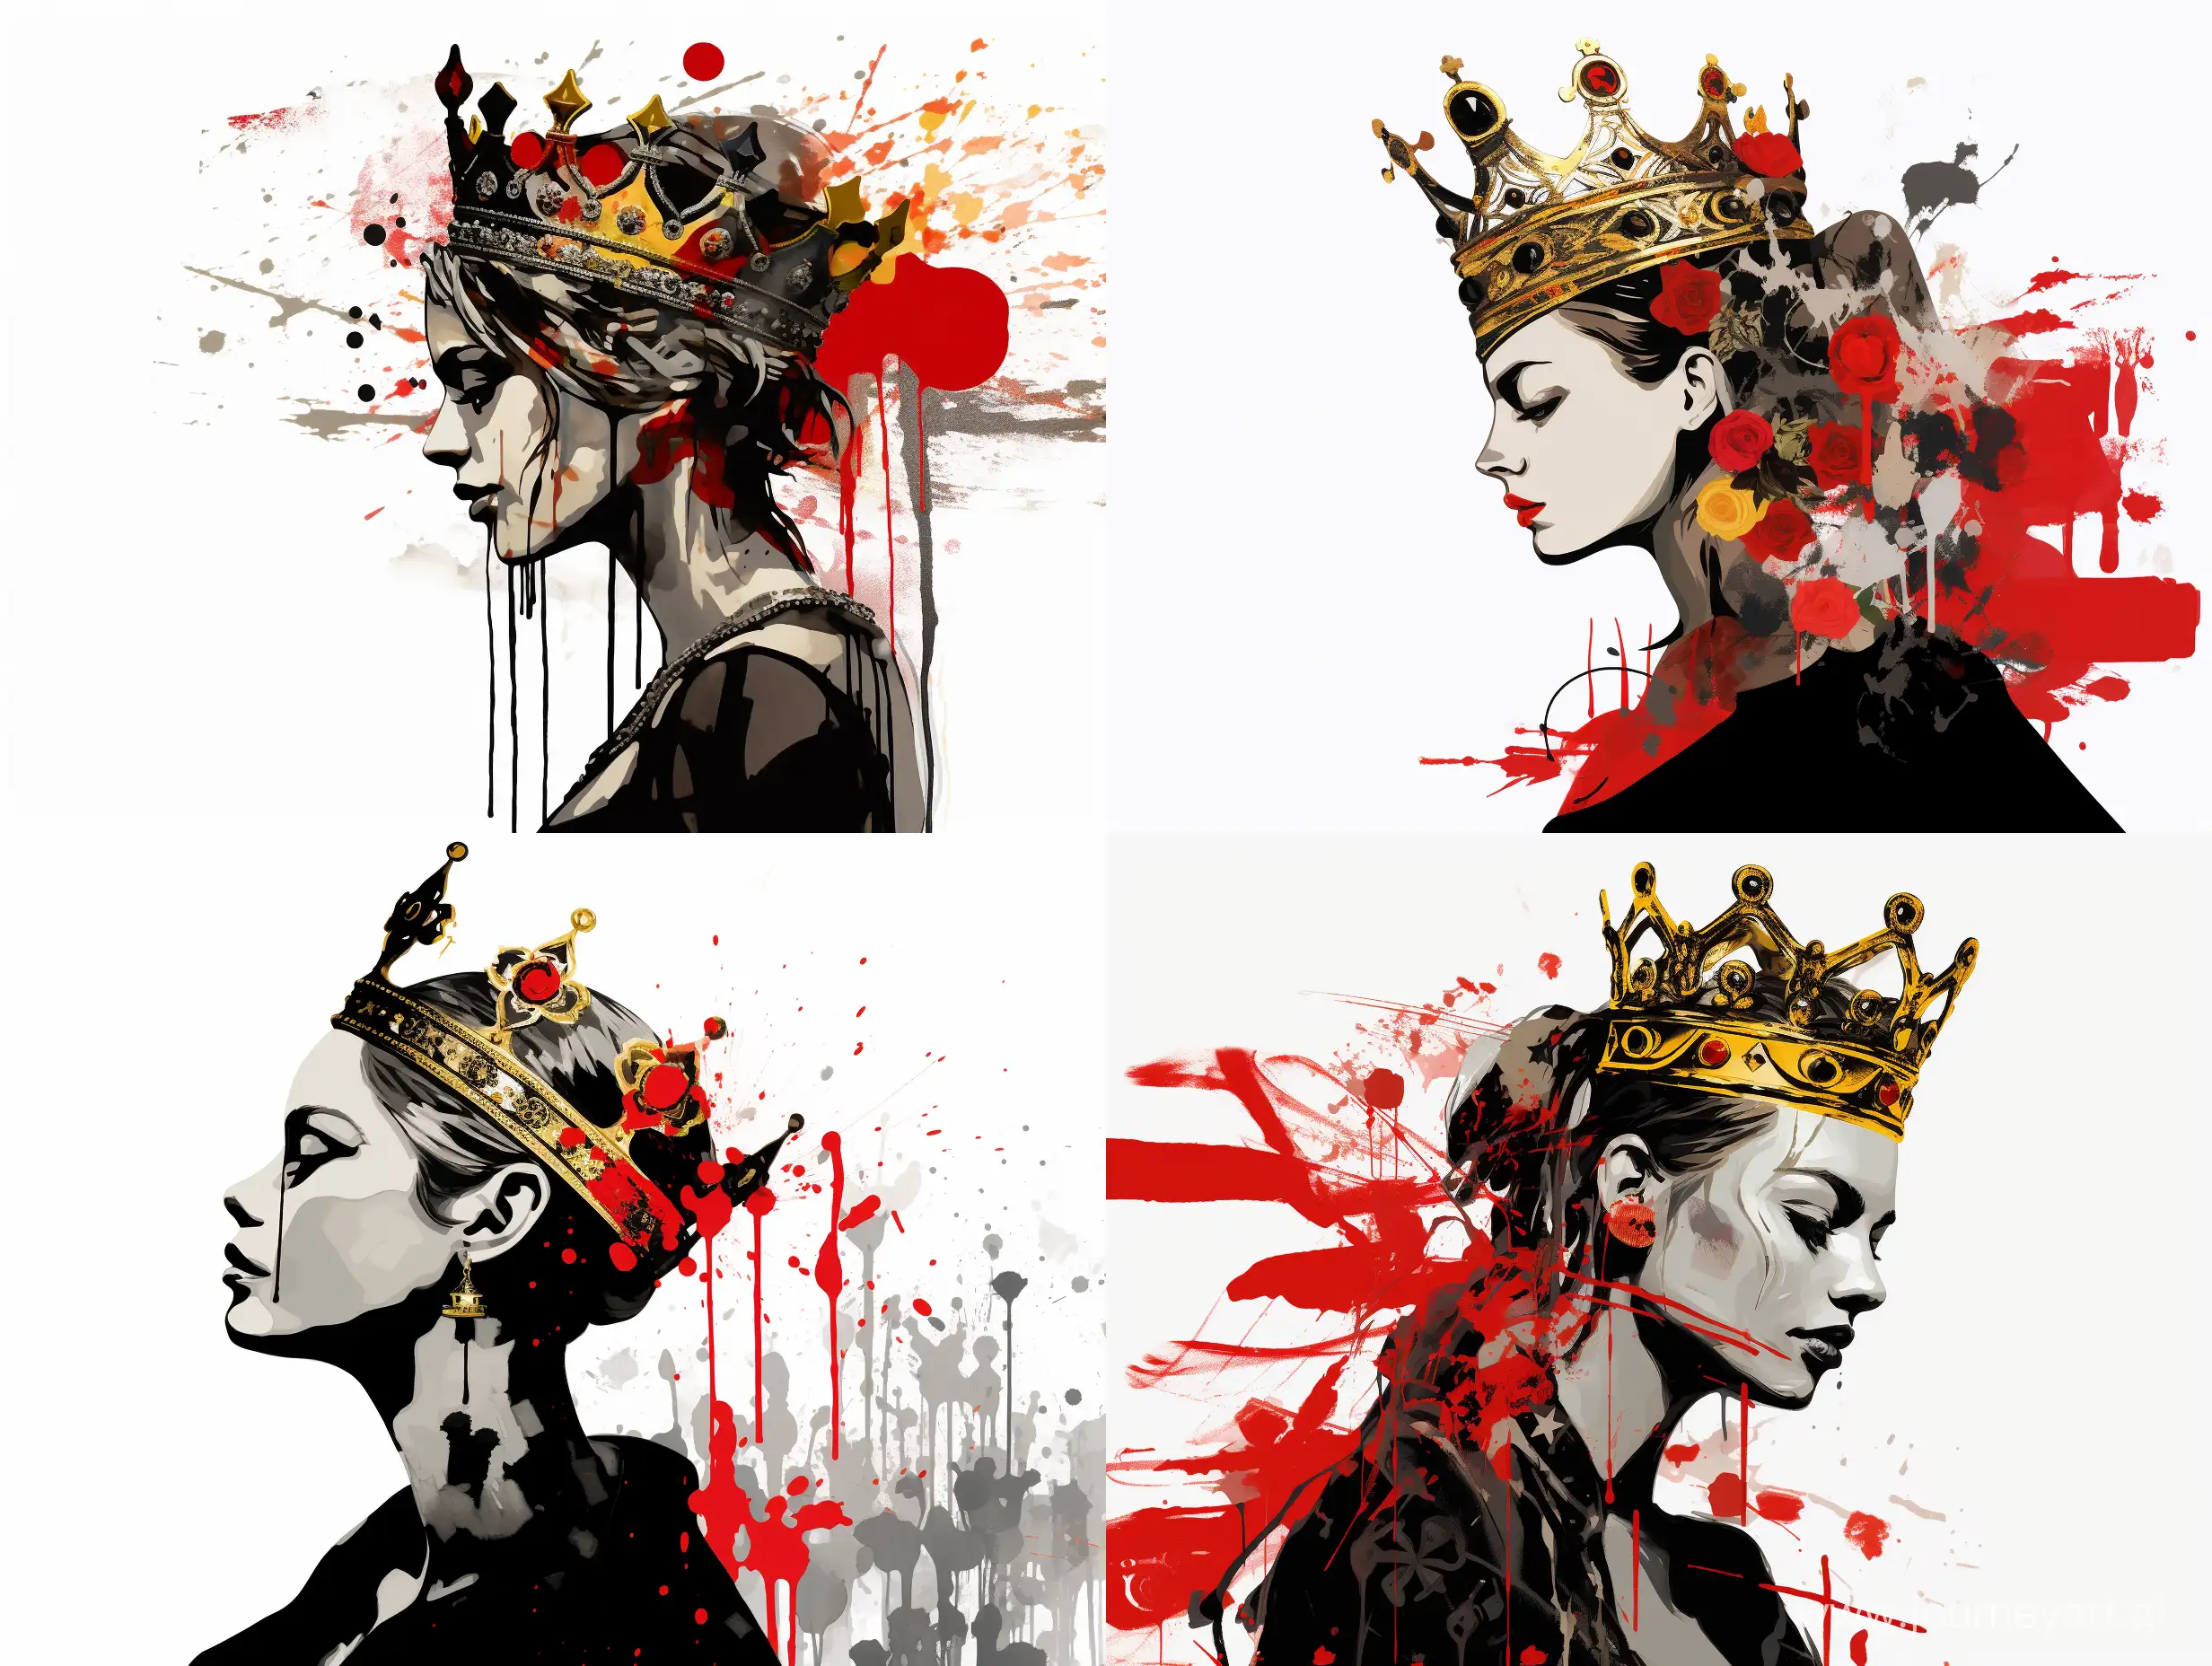 Young Queen looking like Miucci Prada, Prada clothes, central portrait in profile, on white background, colors: gray, black, red, gold, René Gruot style, decorative, illustration, ink stroke, caricature